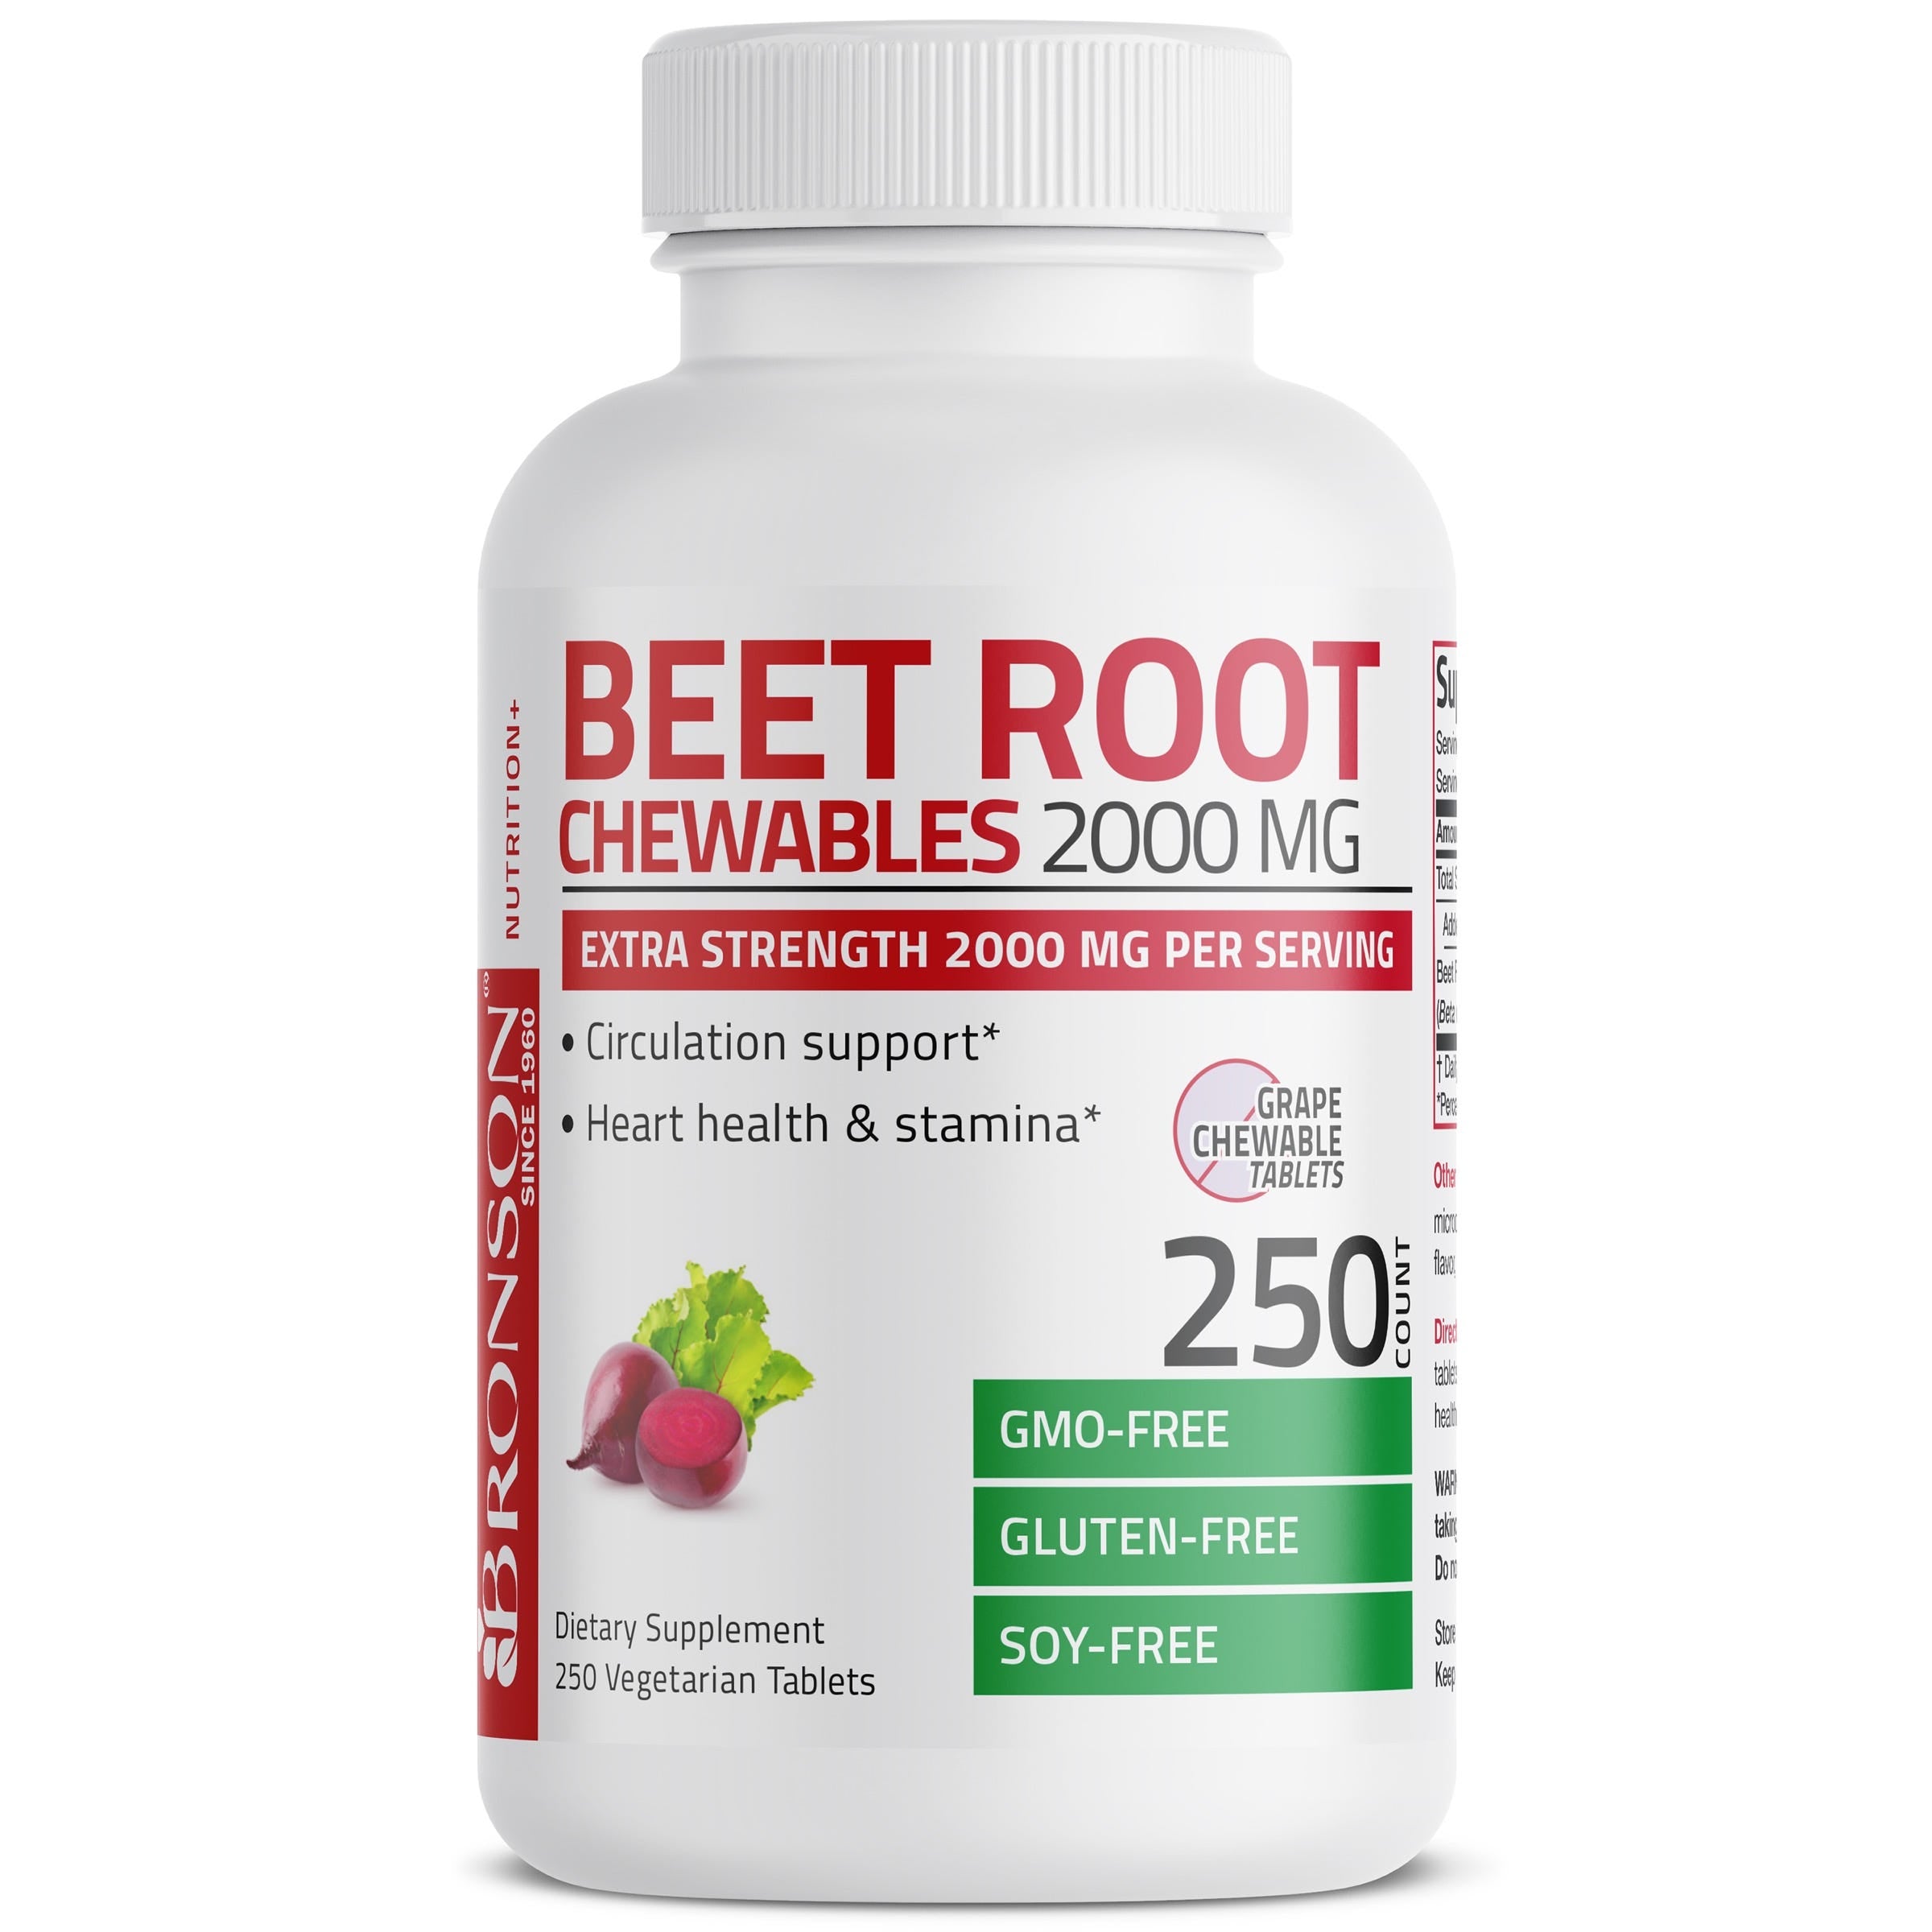 Beet Root Chewables 2000 MG, 250 Grape Flavored Tablets view 3 of 6